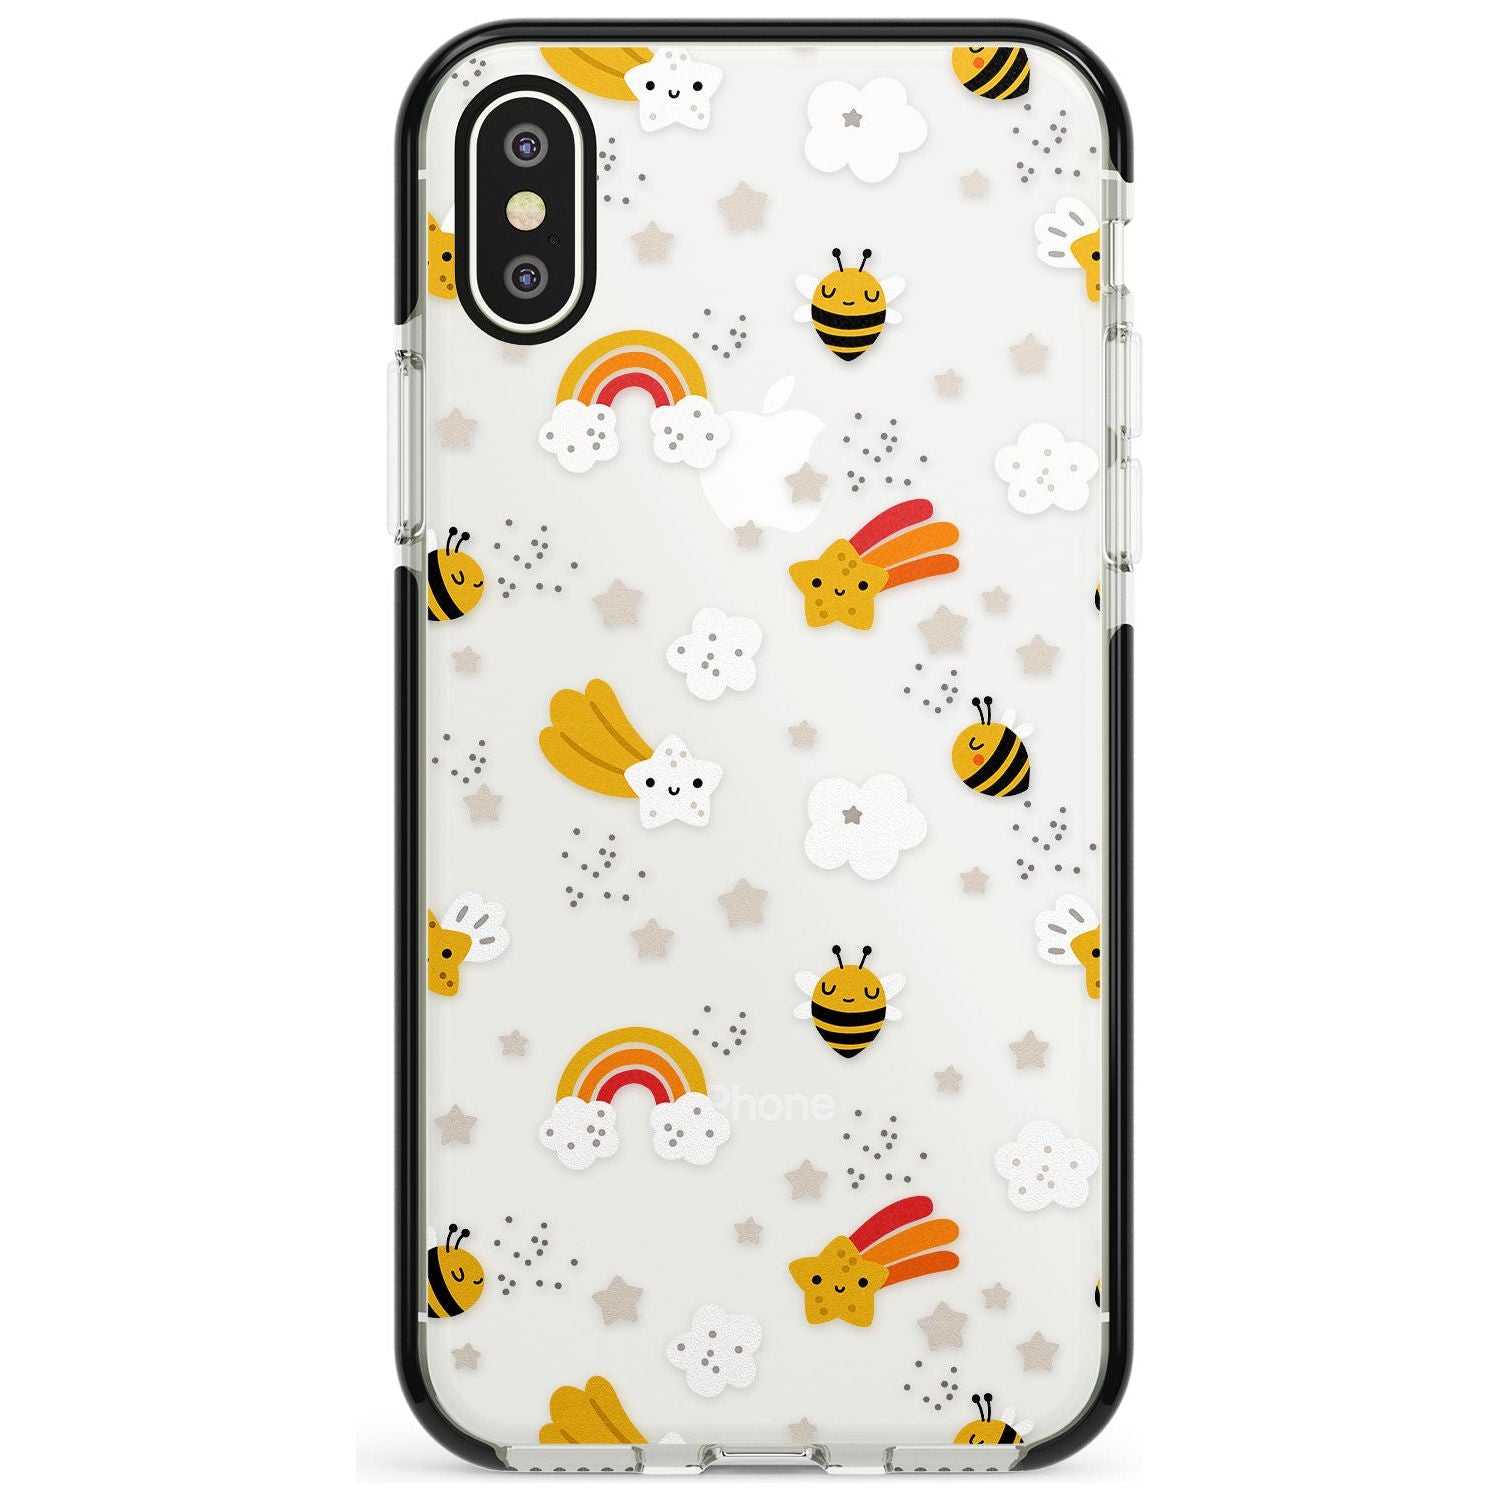 Busy Bee Black Impact Phone Case for iPhone X XS Max XR